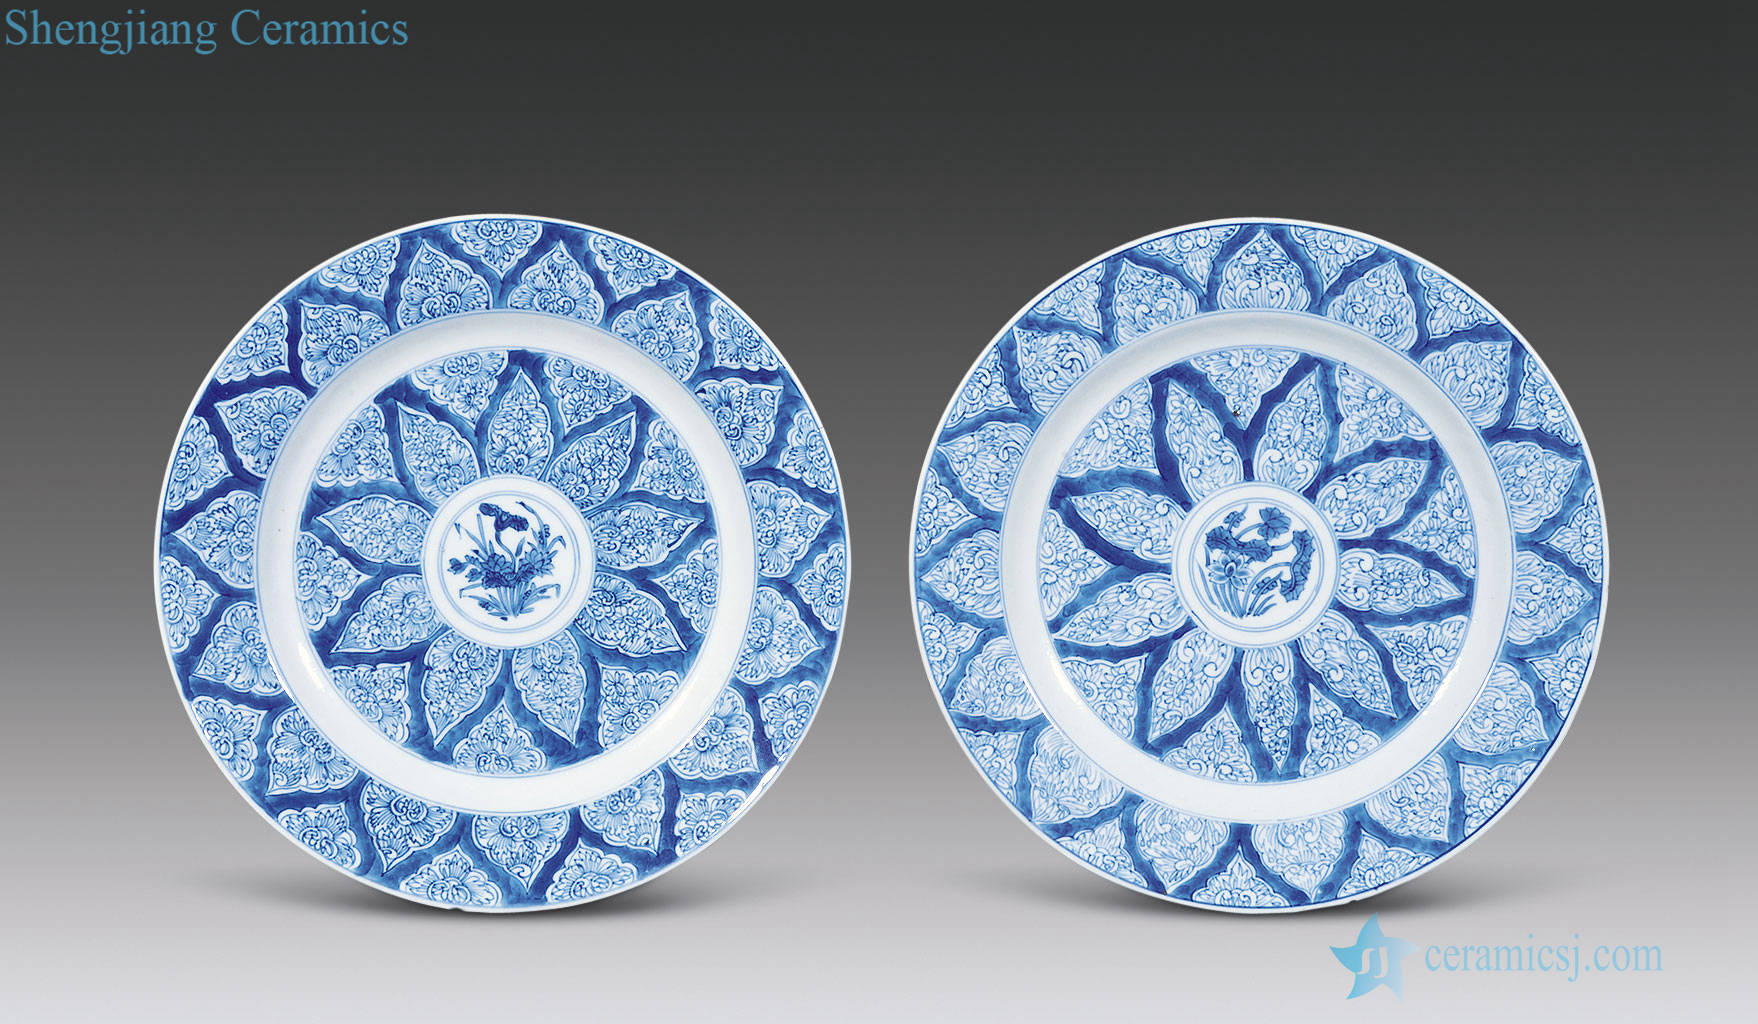 The qing emperor kangxi in blue and white brocade medallion even families figure plate (a) all the way